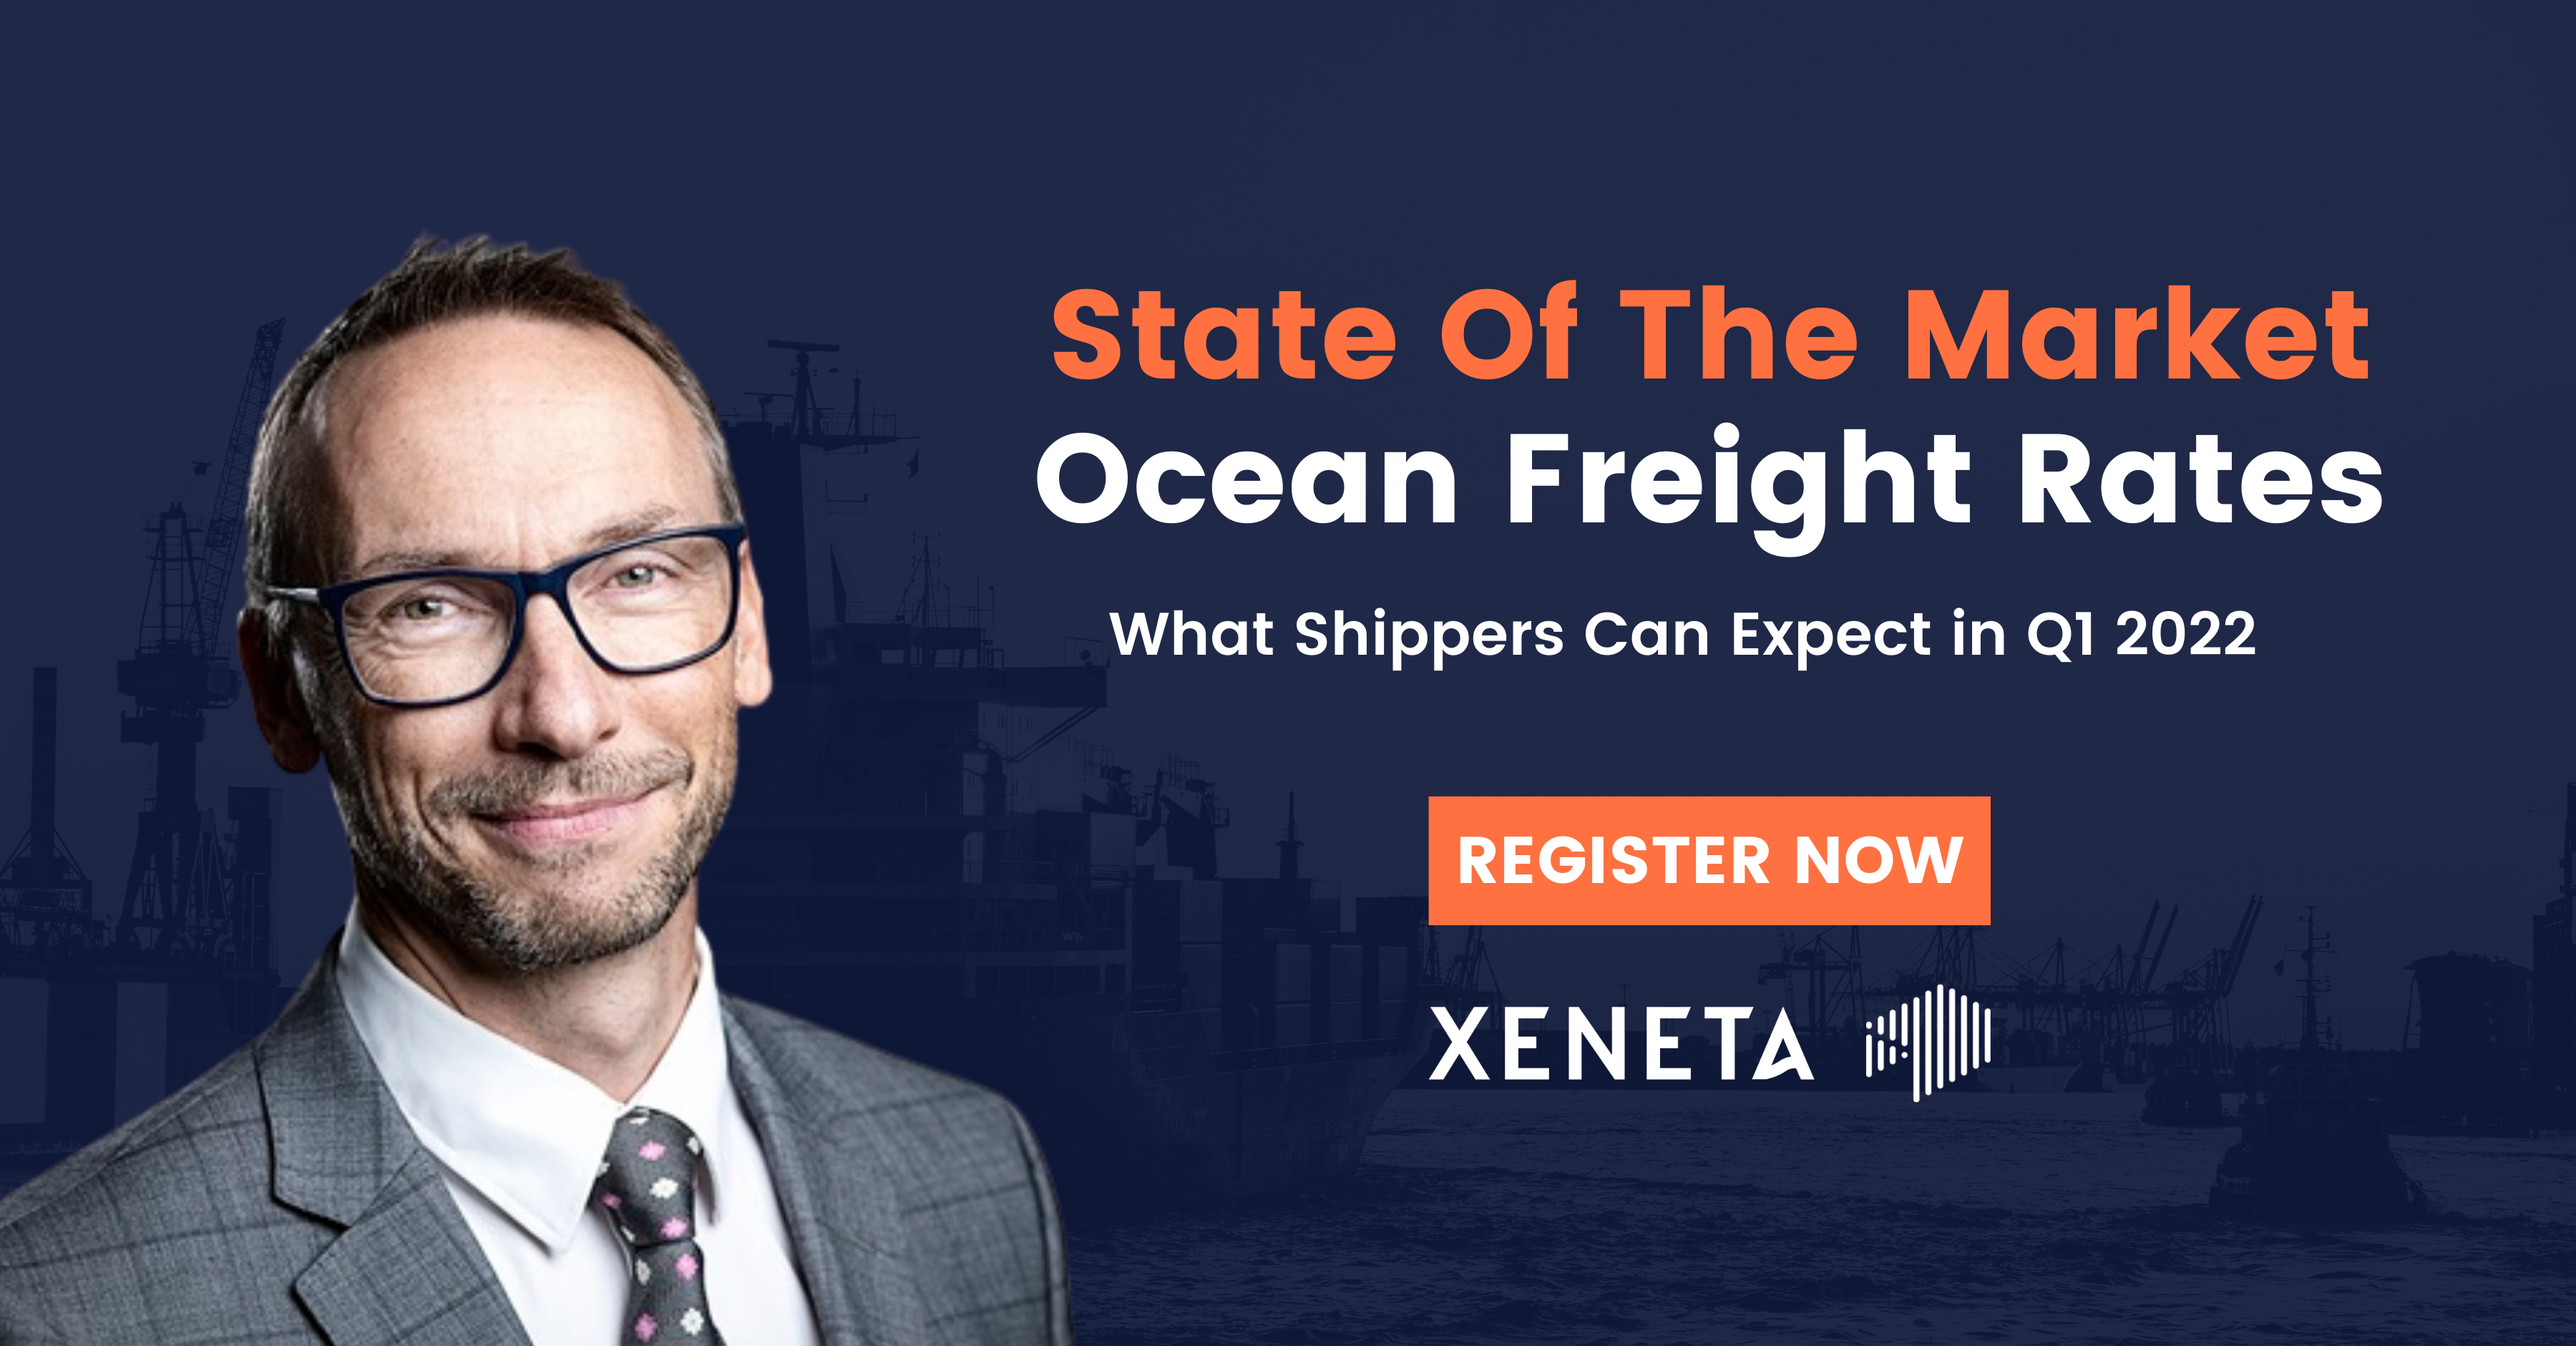 [LIVE WEBINAR] January 18 | What Shippers Can Expect in Q1 2022